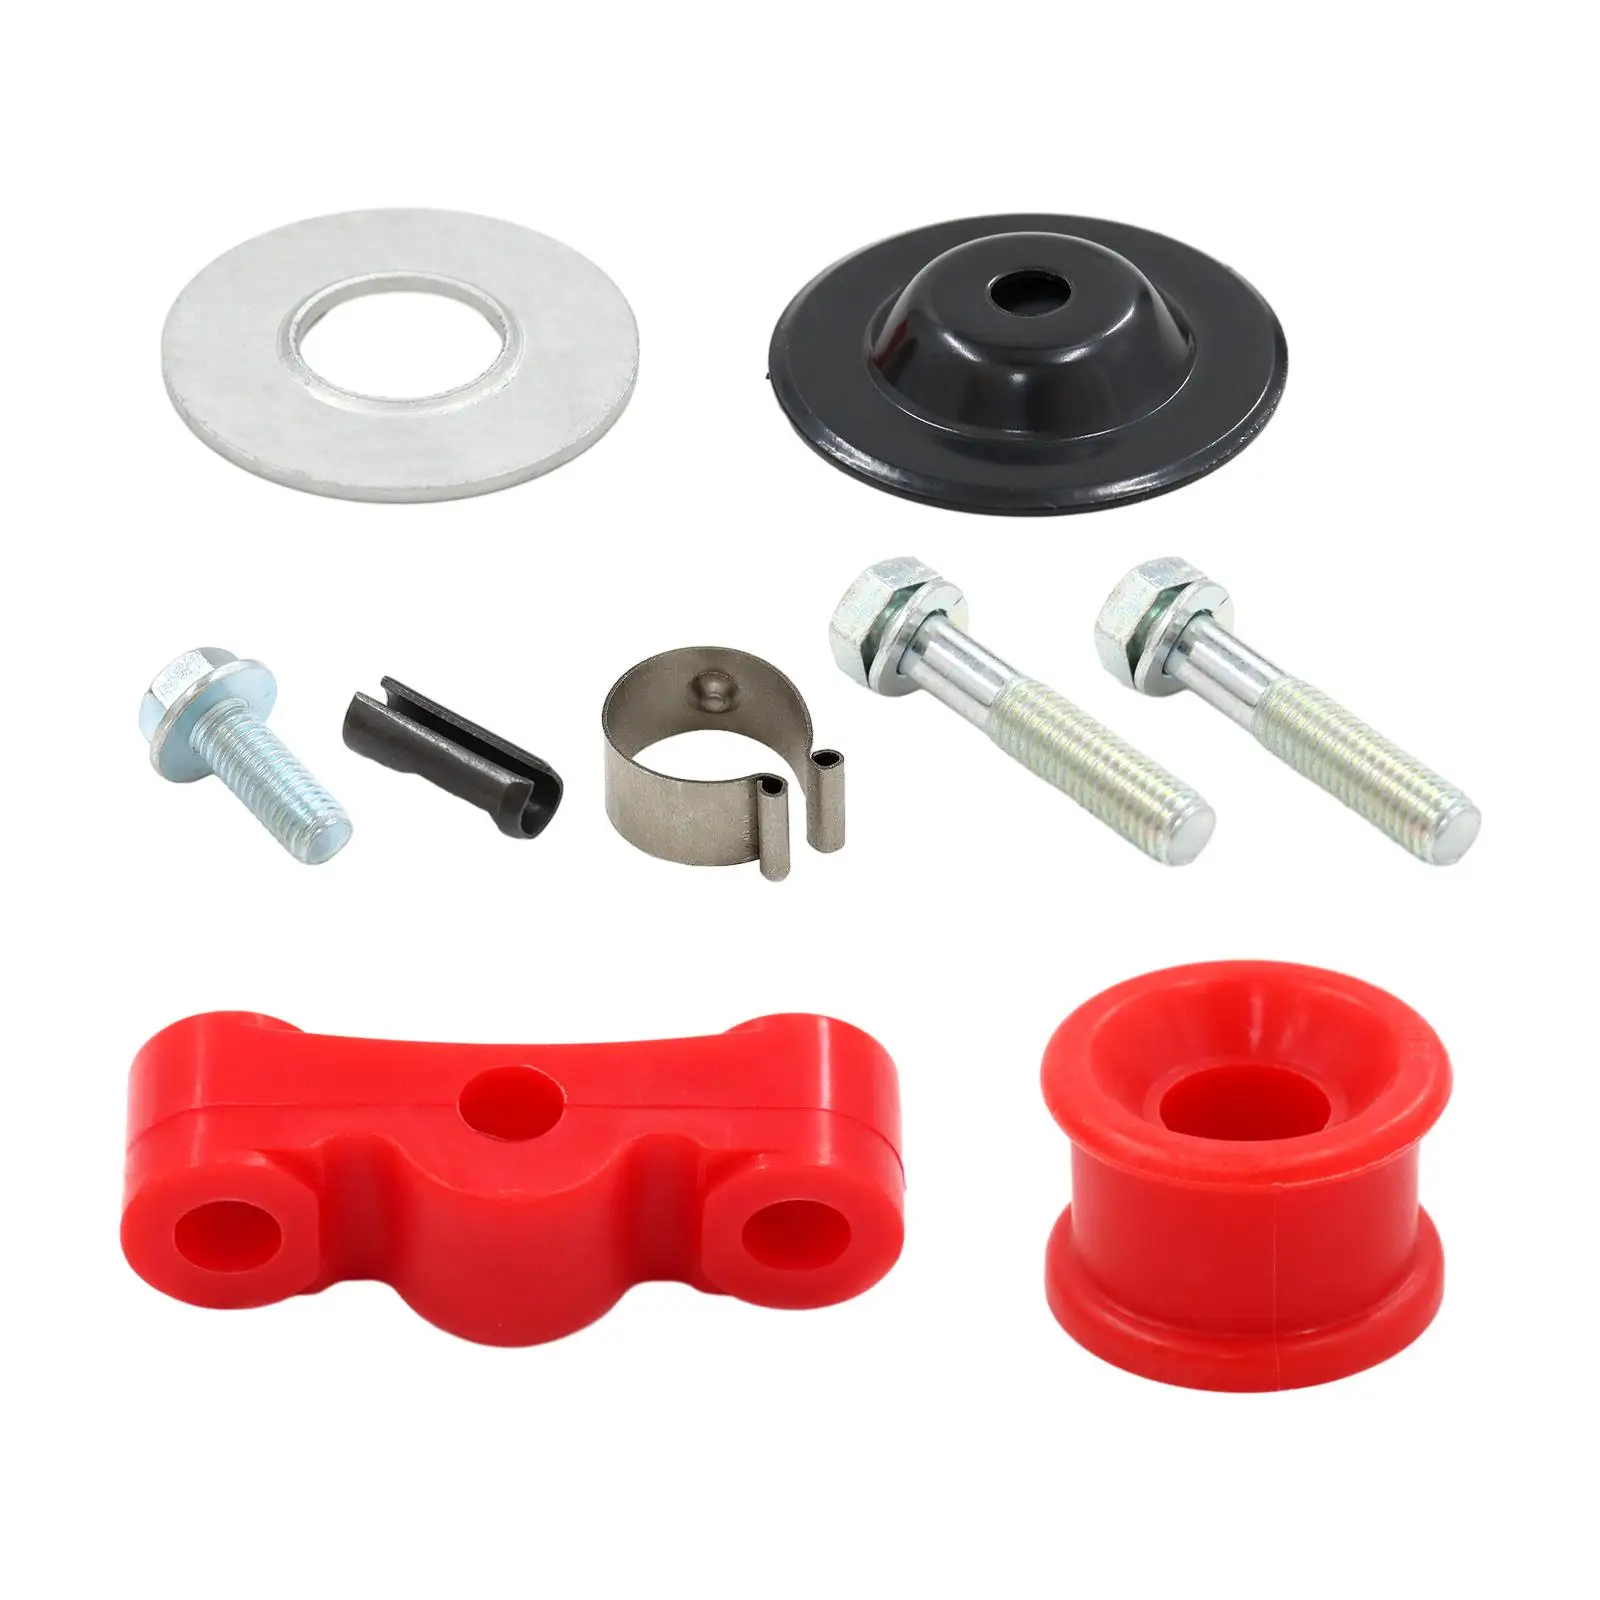 Red Shift Linkage Bushings Kit Auto Accessories for Honda Crx Durable